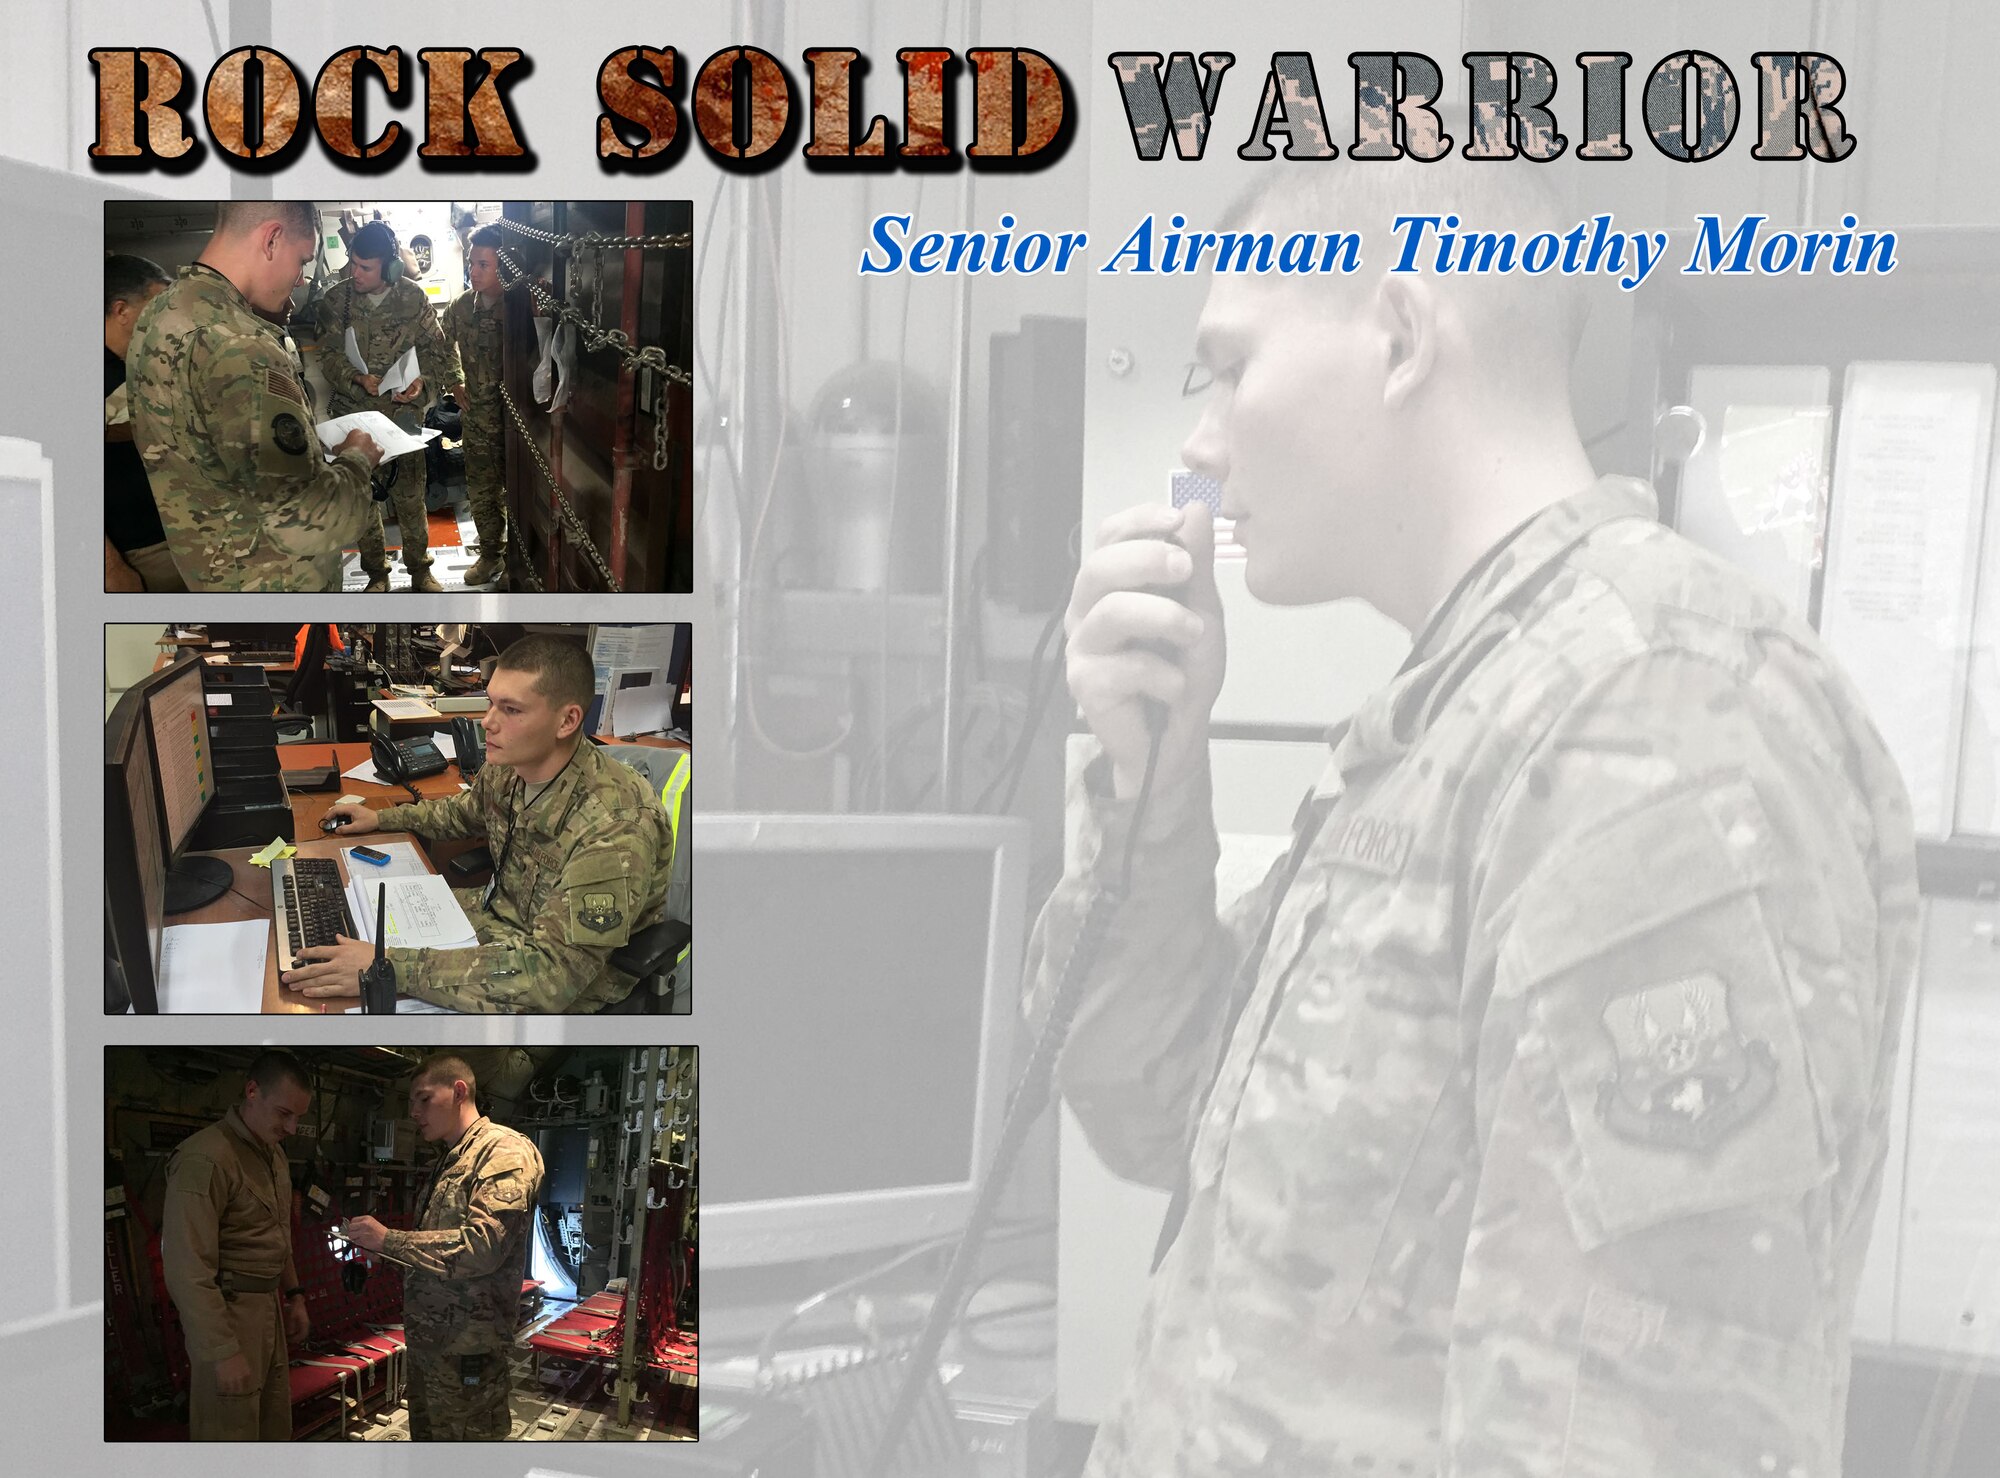 This week’s Rock Solid Warrior is Senior Airman Timothy Morin, a 370th Air Expeditionary Advisory Group ramp controller. Morin is deployed from the 732nd Air Mobility Squadron at Elmendorf Air Force Base, Alaska.